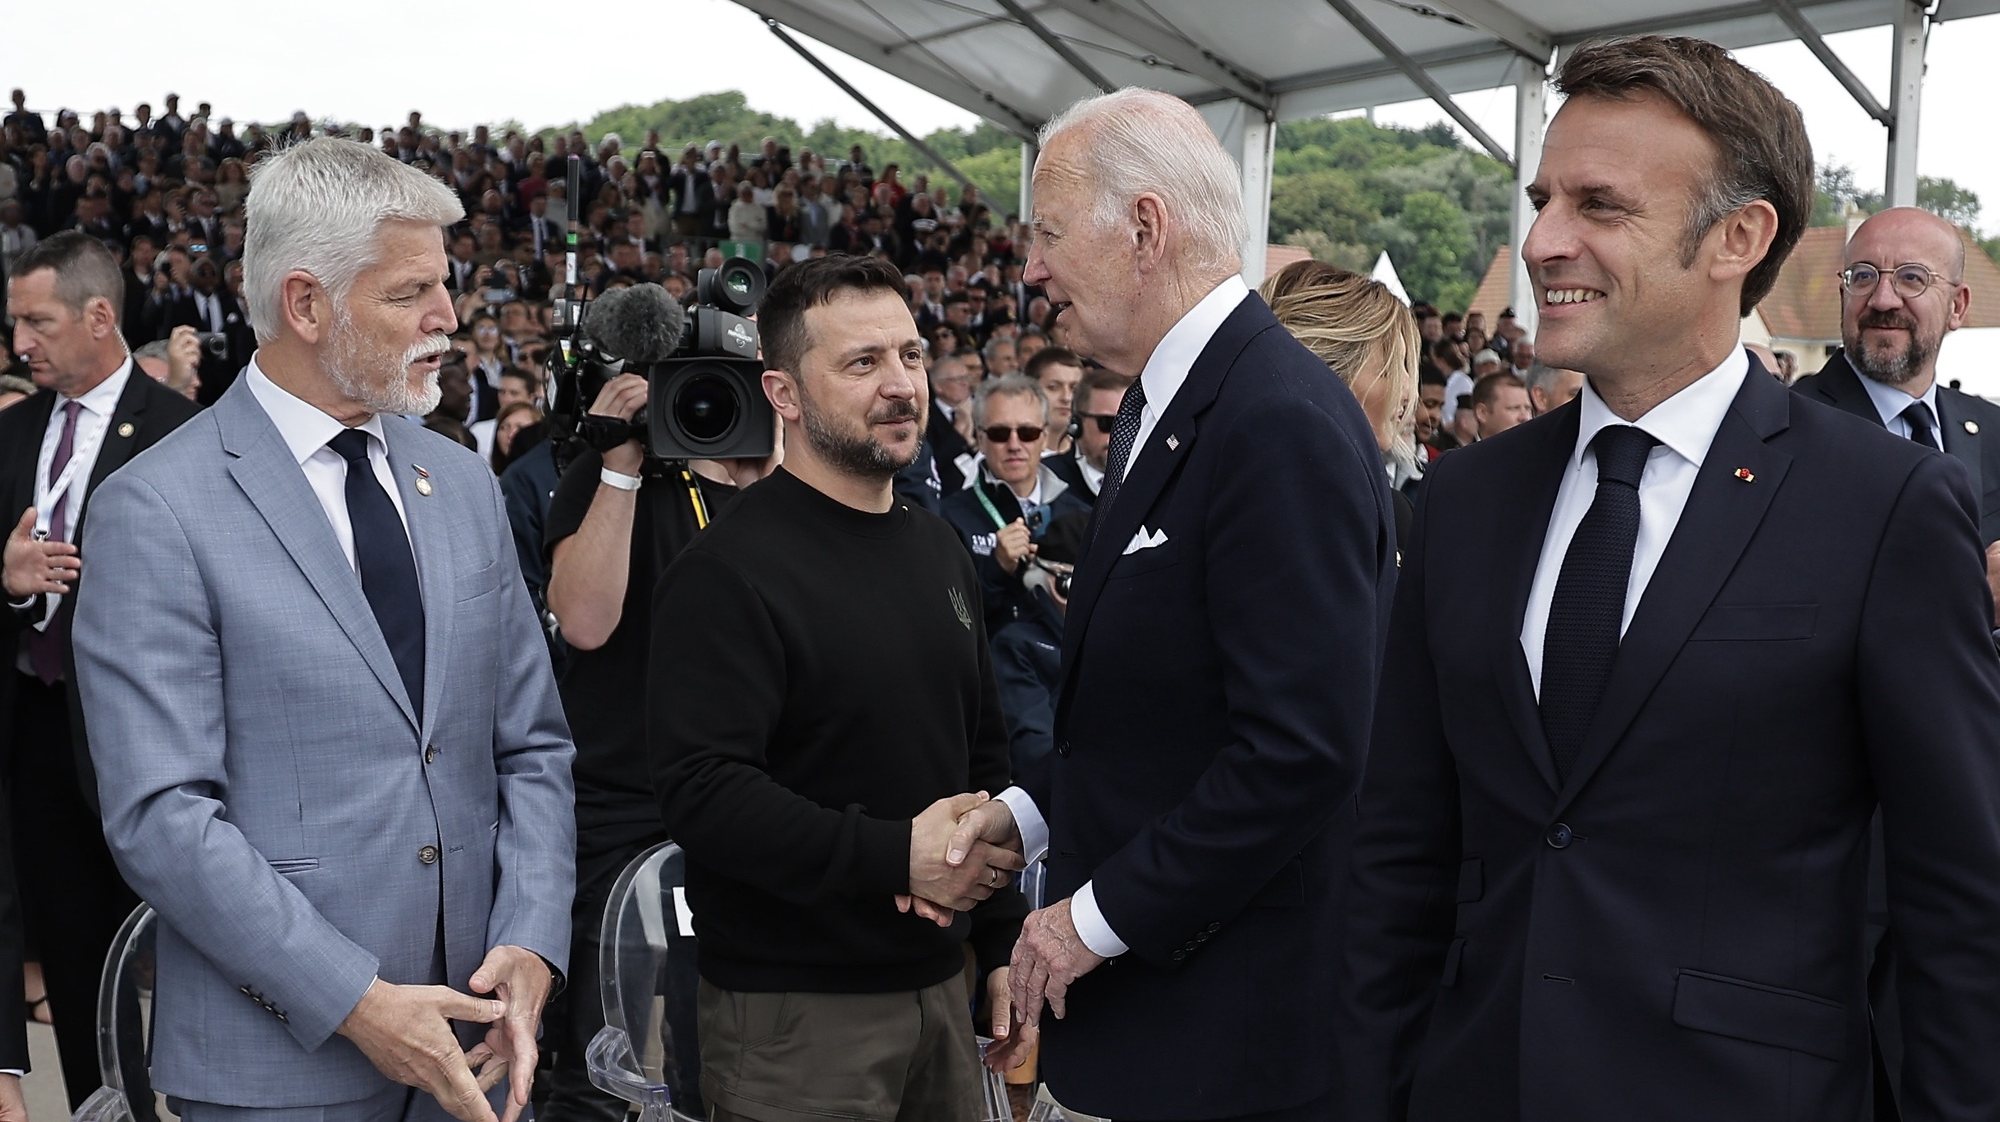 epa11393781 France&#039;s President Emmanuel Macron (R), US President Joe Biden (2-R), Ukrainian President Volodymyr Zelensky (2-L) and Czech President Petr Pavel (L) attend the commemorative ceremony with dozens of heads of States and more than 200 veterans for the 80th anniversary of D-Day landings in Normandy at Omaha Beach, Saint-Laurent-sur-Mer, France, 06 June 2024. More than 160.000 Western allied troops landed on beaches in Normandy on 6 June 1944 launching the liberation of Western Europe from Nazi occupation during World War II.  EPA/CHRISTOPHE PETIT TESSON